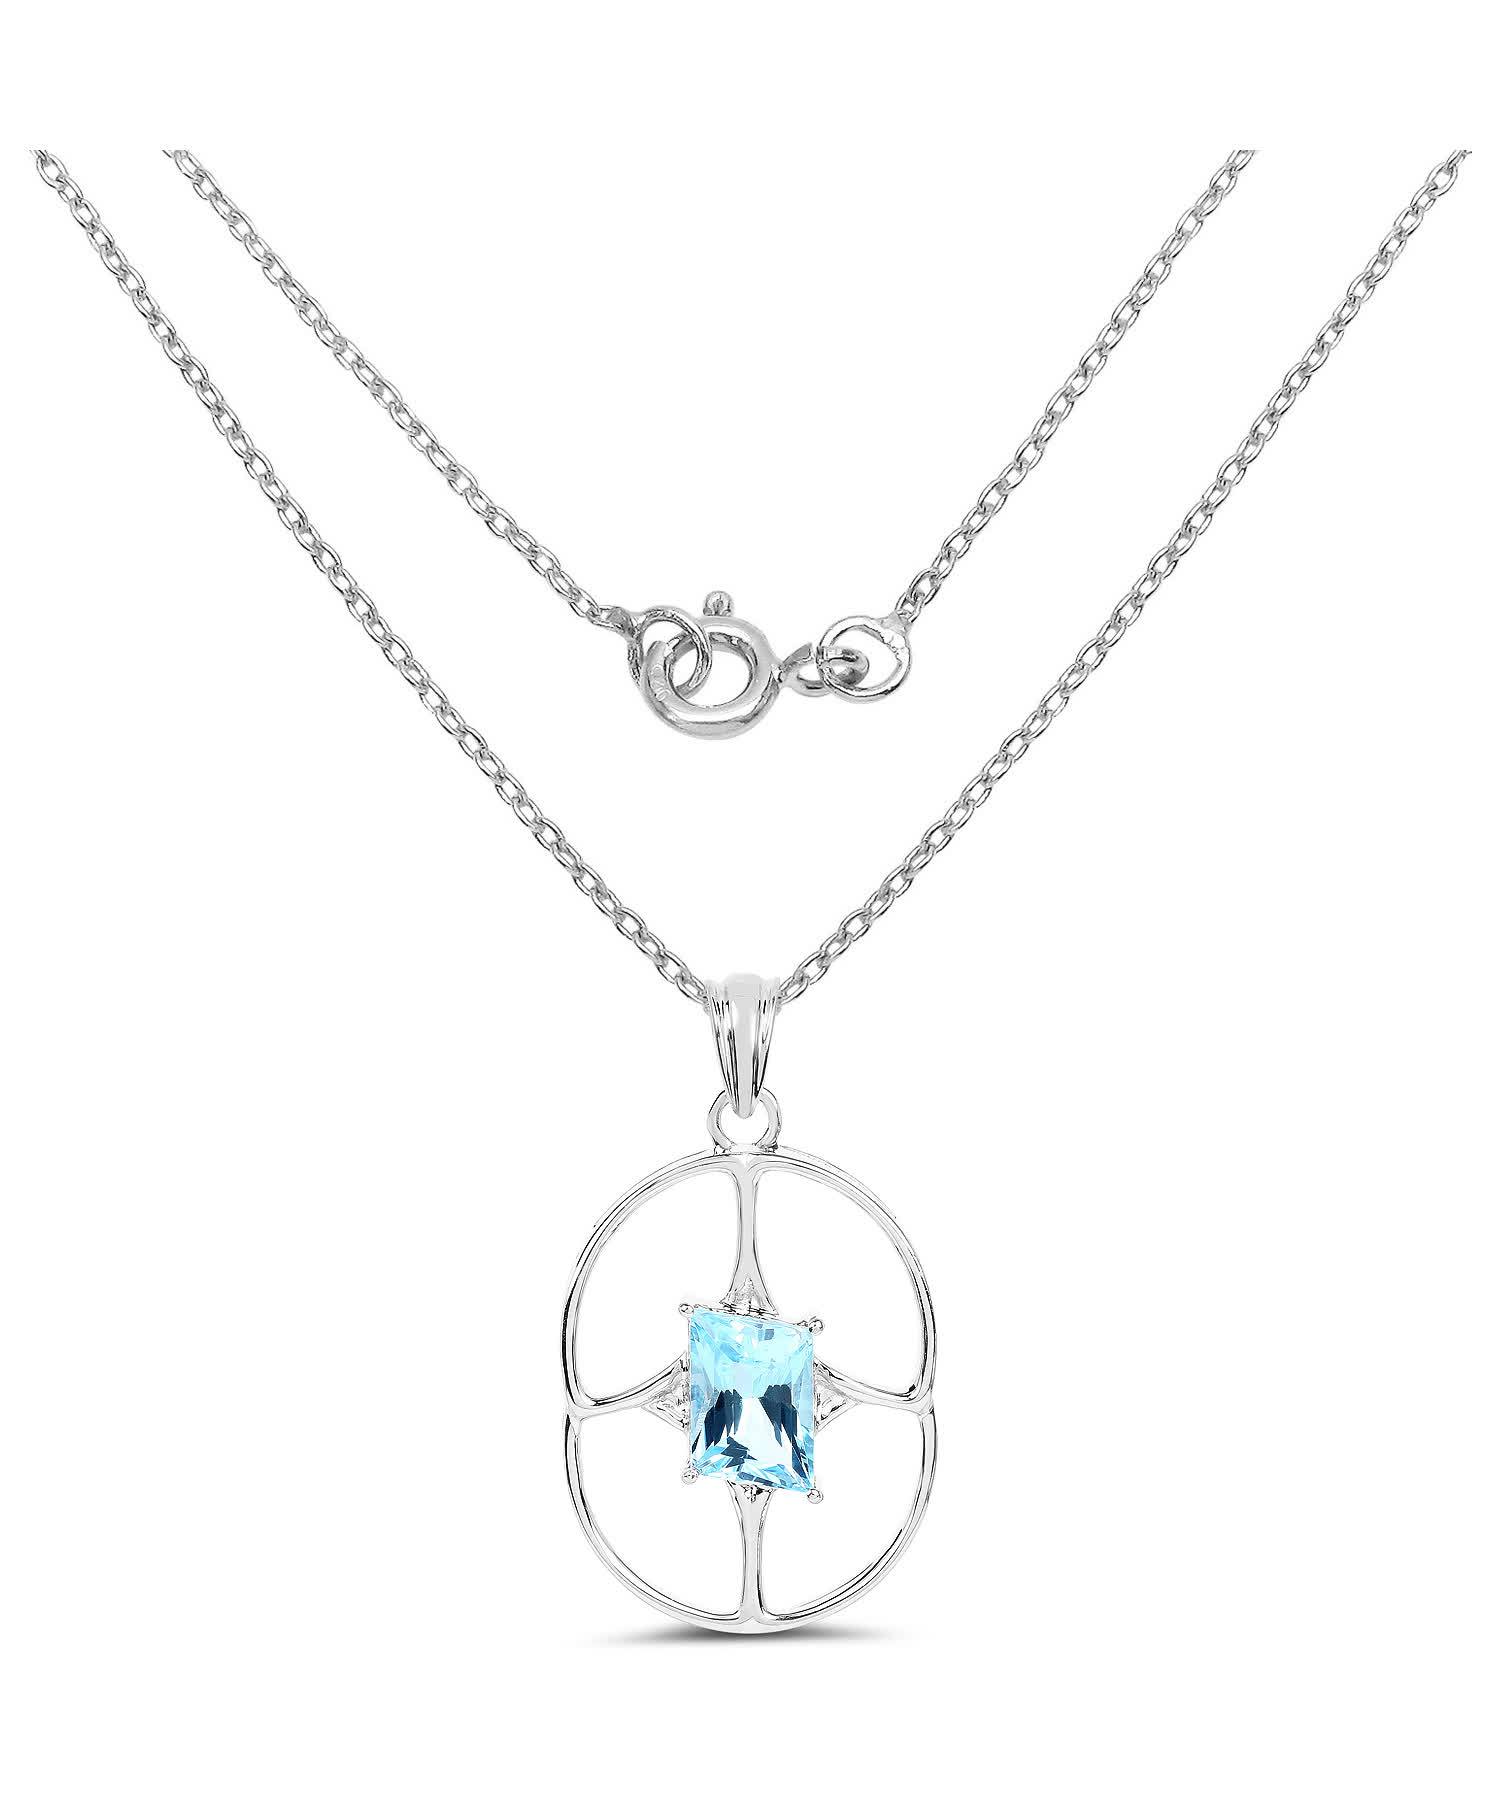 5.25ctw Natural Swiss Blue Topaz Rhodium Plated 925 Sterling Silver Pendant With Chain View 2